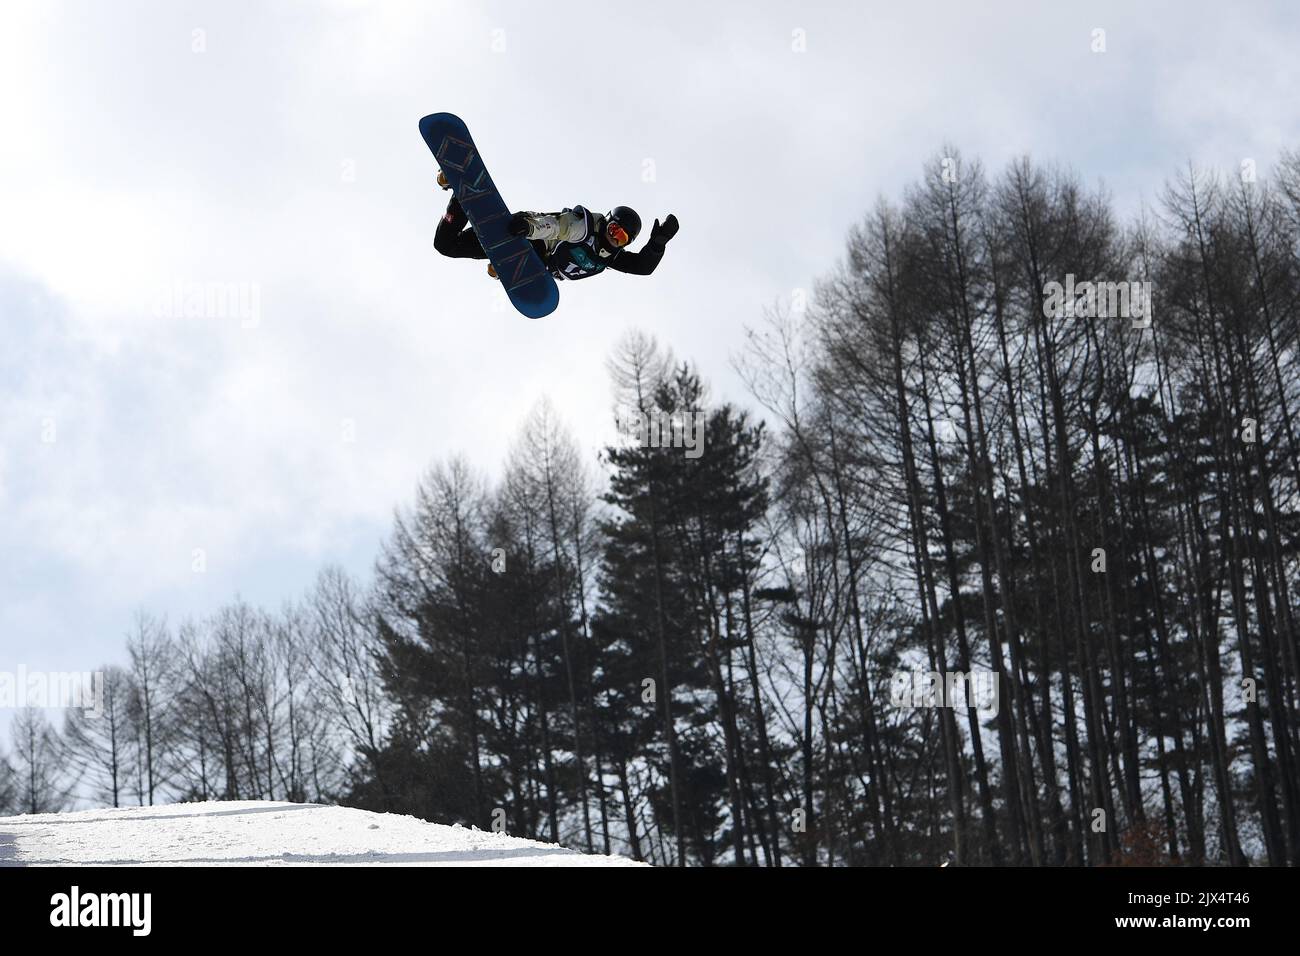 Andre Hoeflich of Germany in action during the men's qualifying round of  the FIS Freestyle Snowboard World Cup Halfpipe competition at Phoenix Park,  Bokwang, in Pyeongchang, South Korea, Friday, Feb. 17, 2017. (